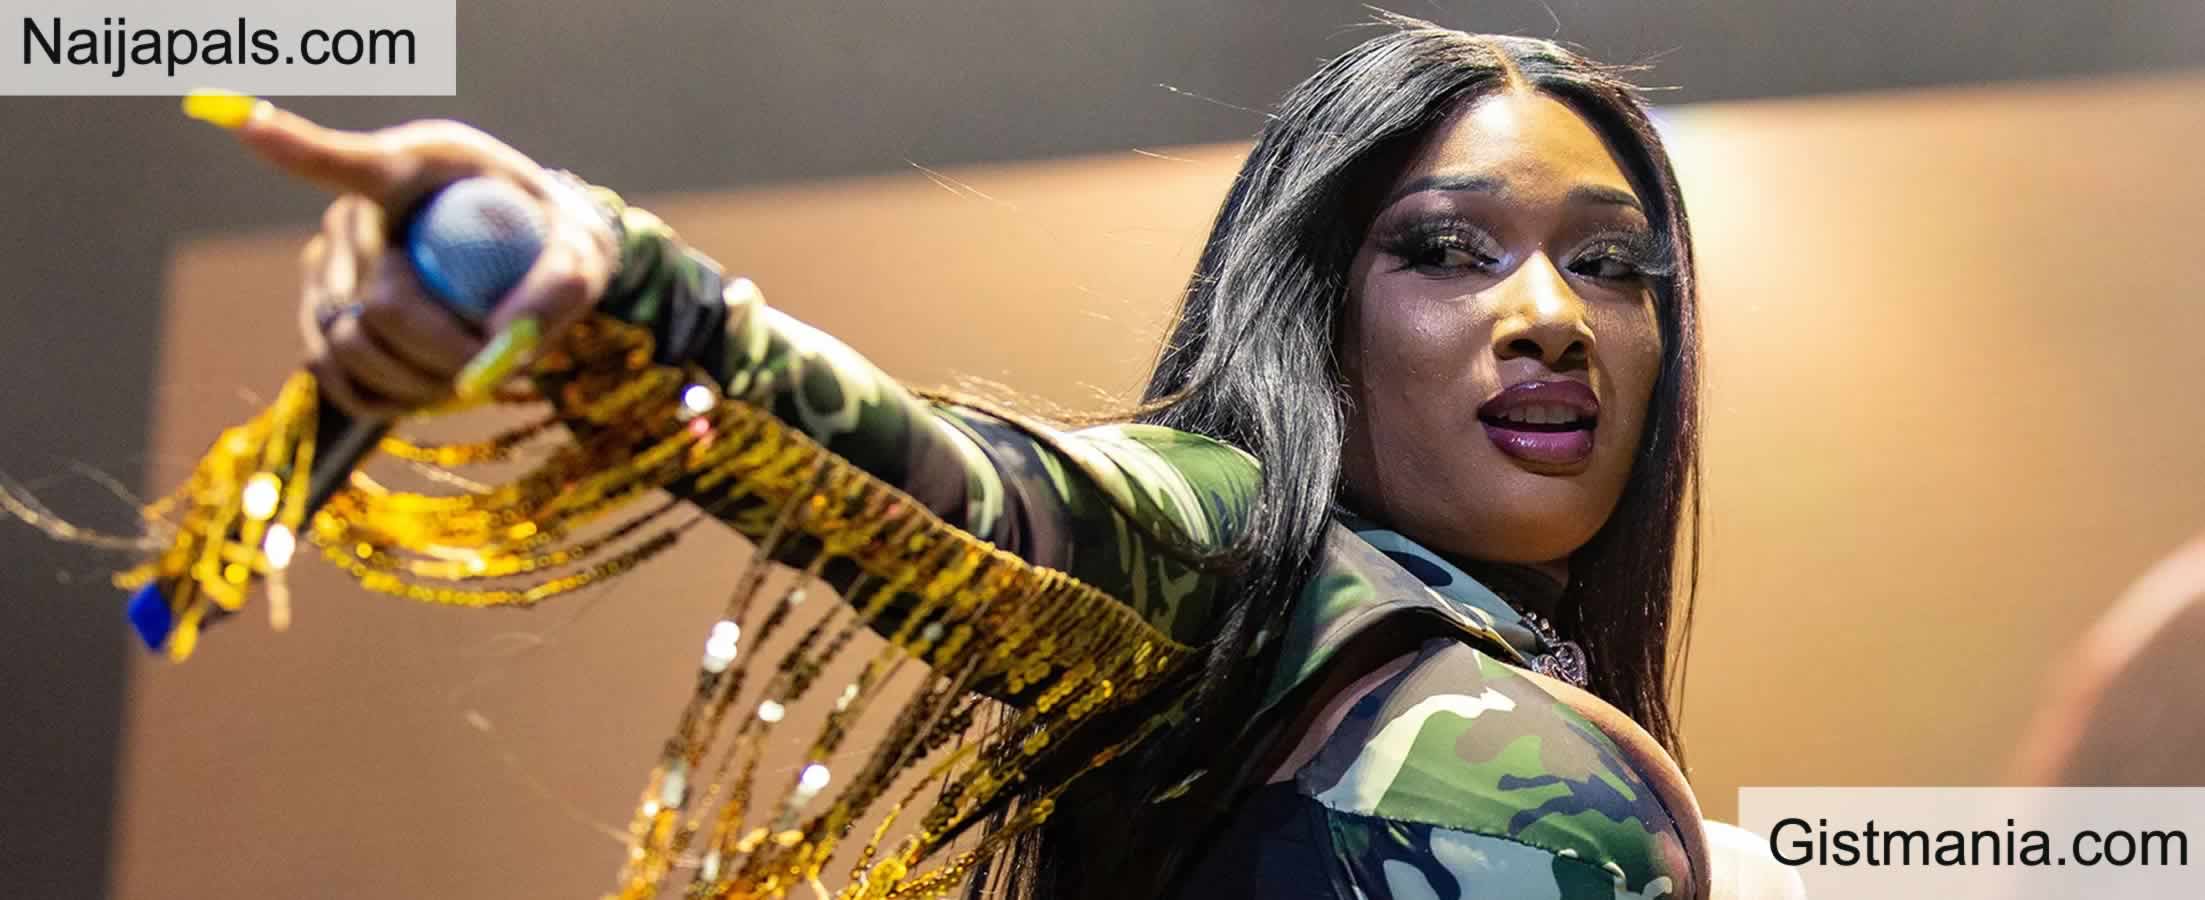 Rapper Megan Thee Stallion Sued By Cameraman Claiming He Was Forced To Watch Her Have S3x